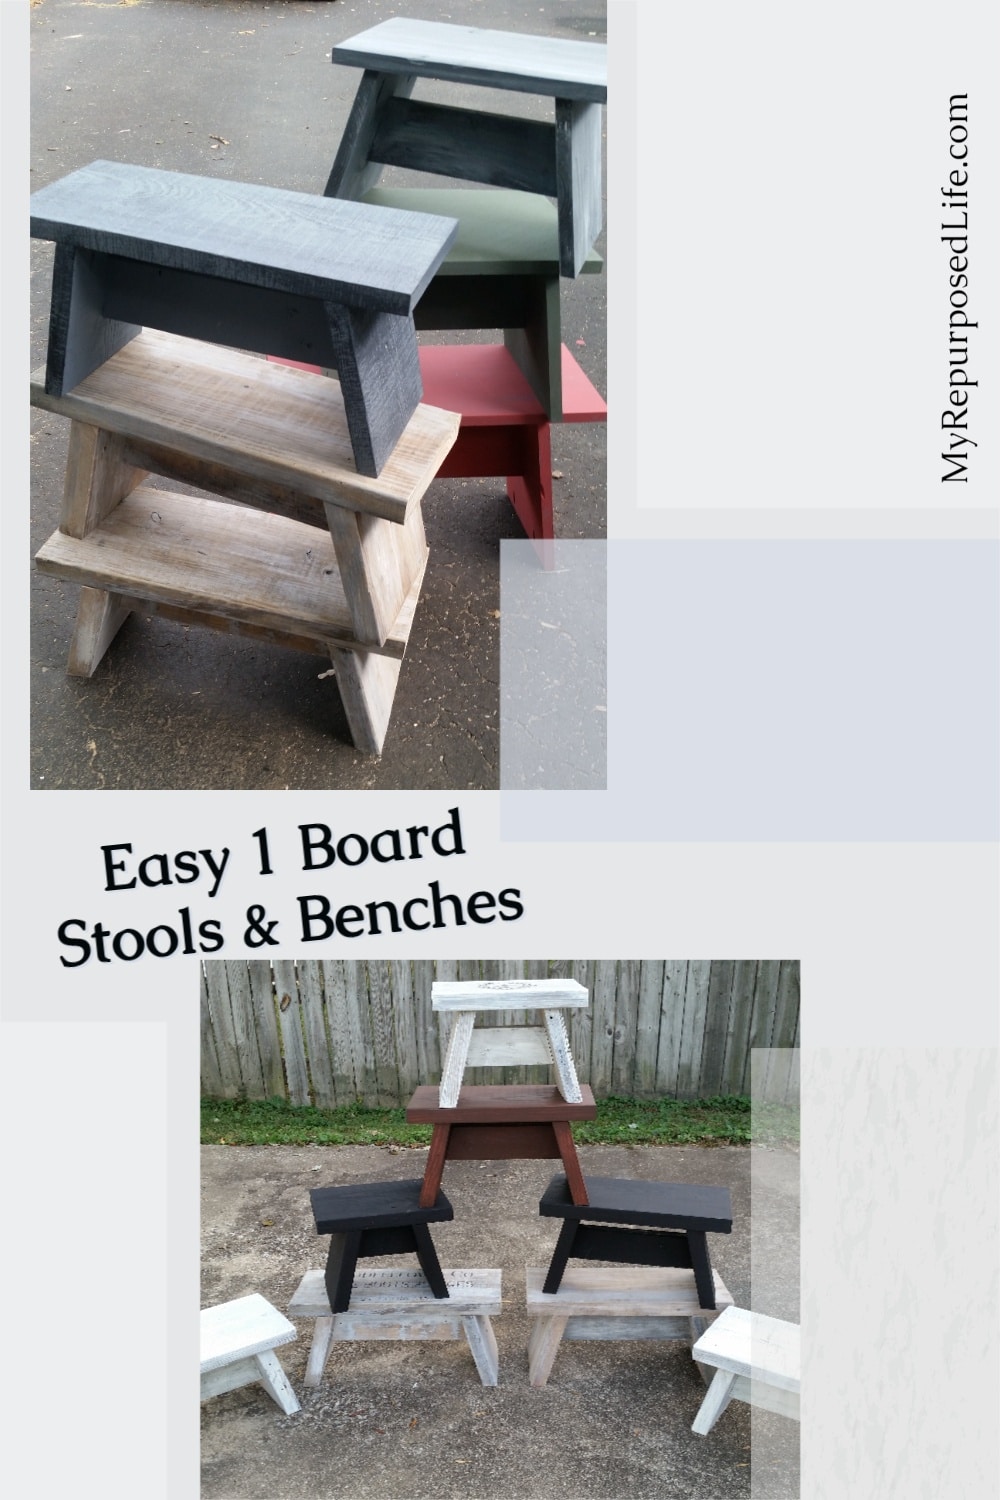 How to make useful one board stools, that are great for that top cupboard, for the grand kids, or an extra place to park your bum. Step by step directions. #MyRepurposedLife #repurposed #oneboard #stools #benches #easy #diy via @repurposedlife